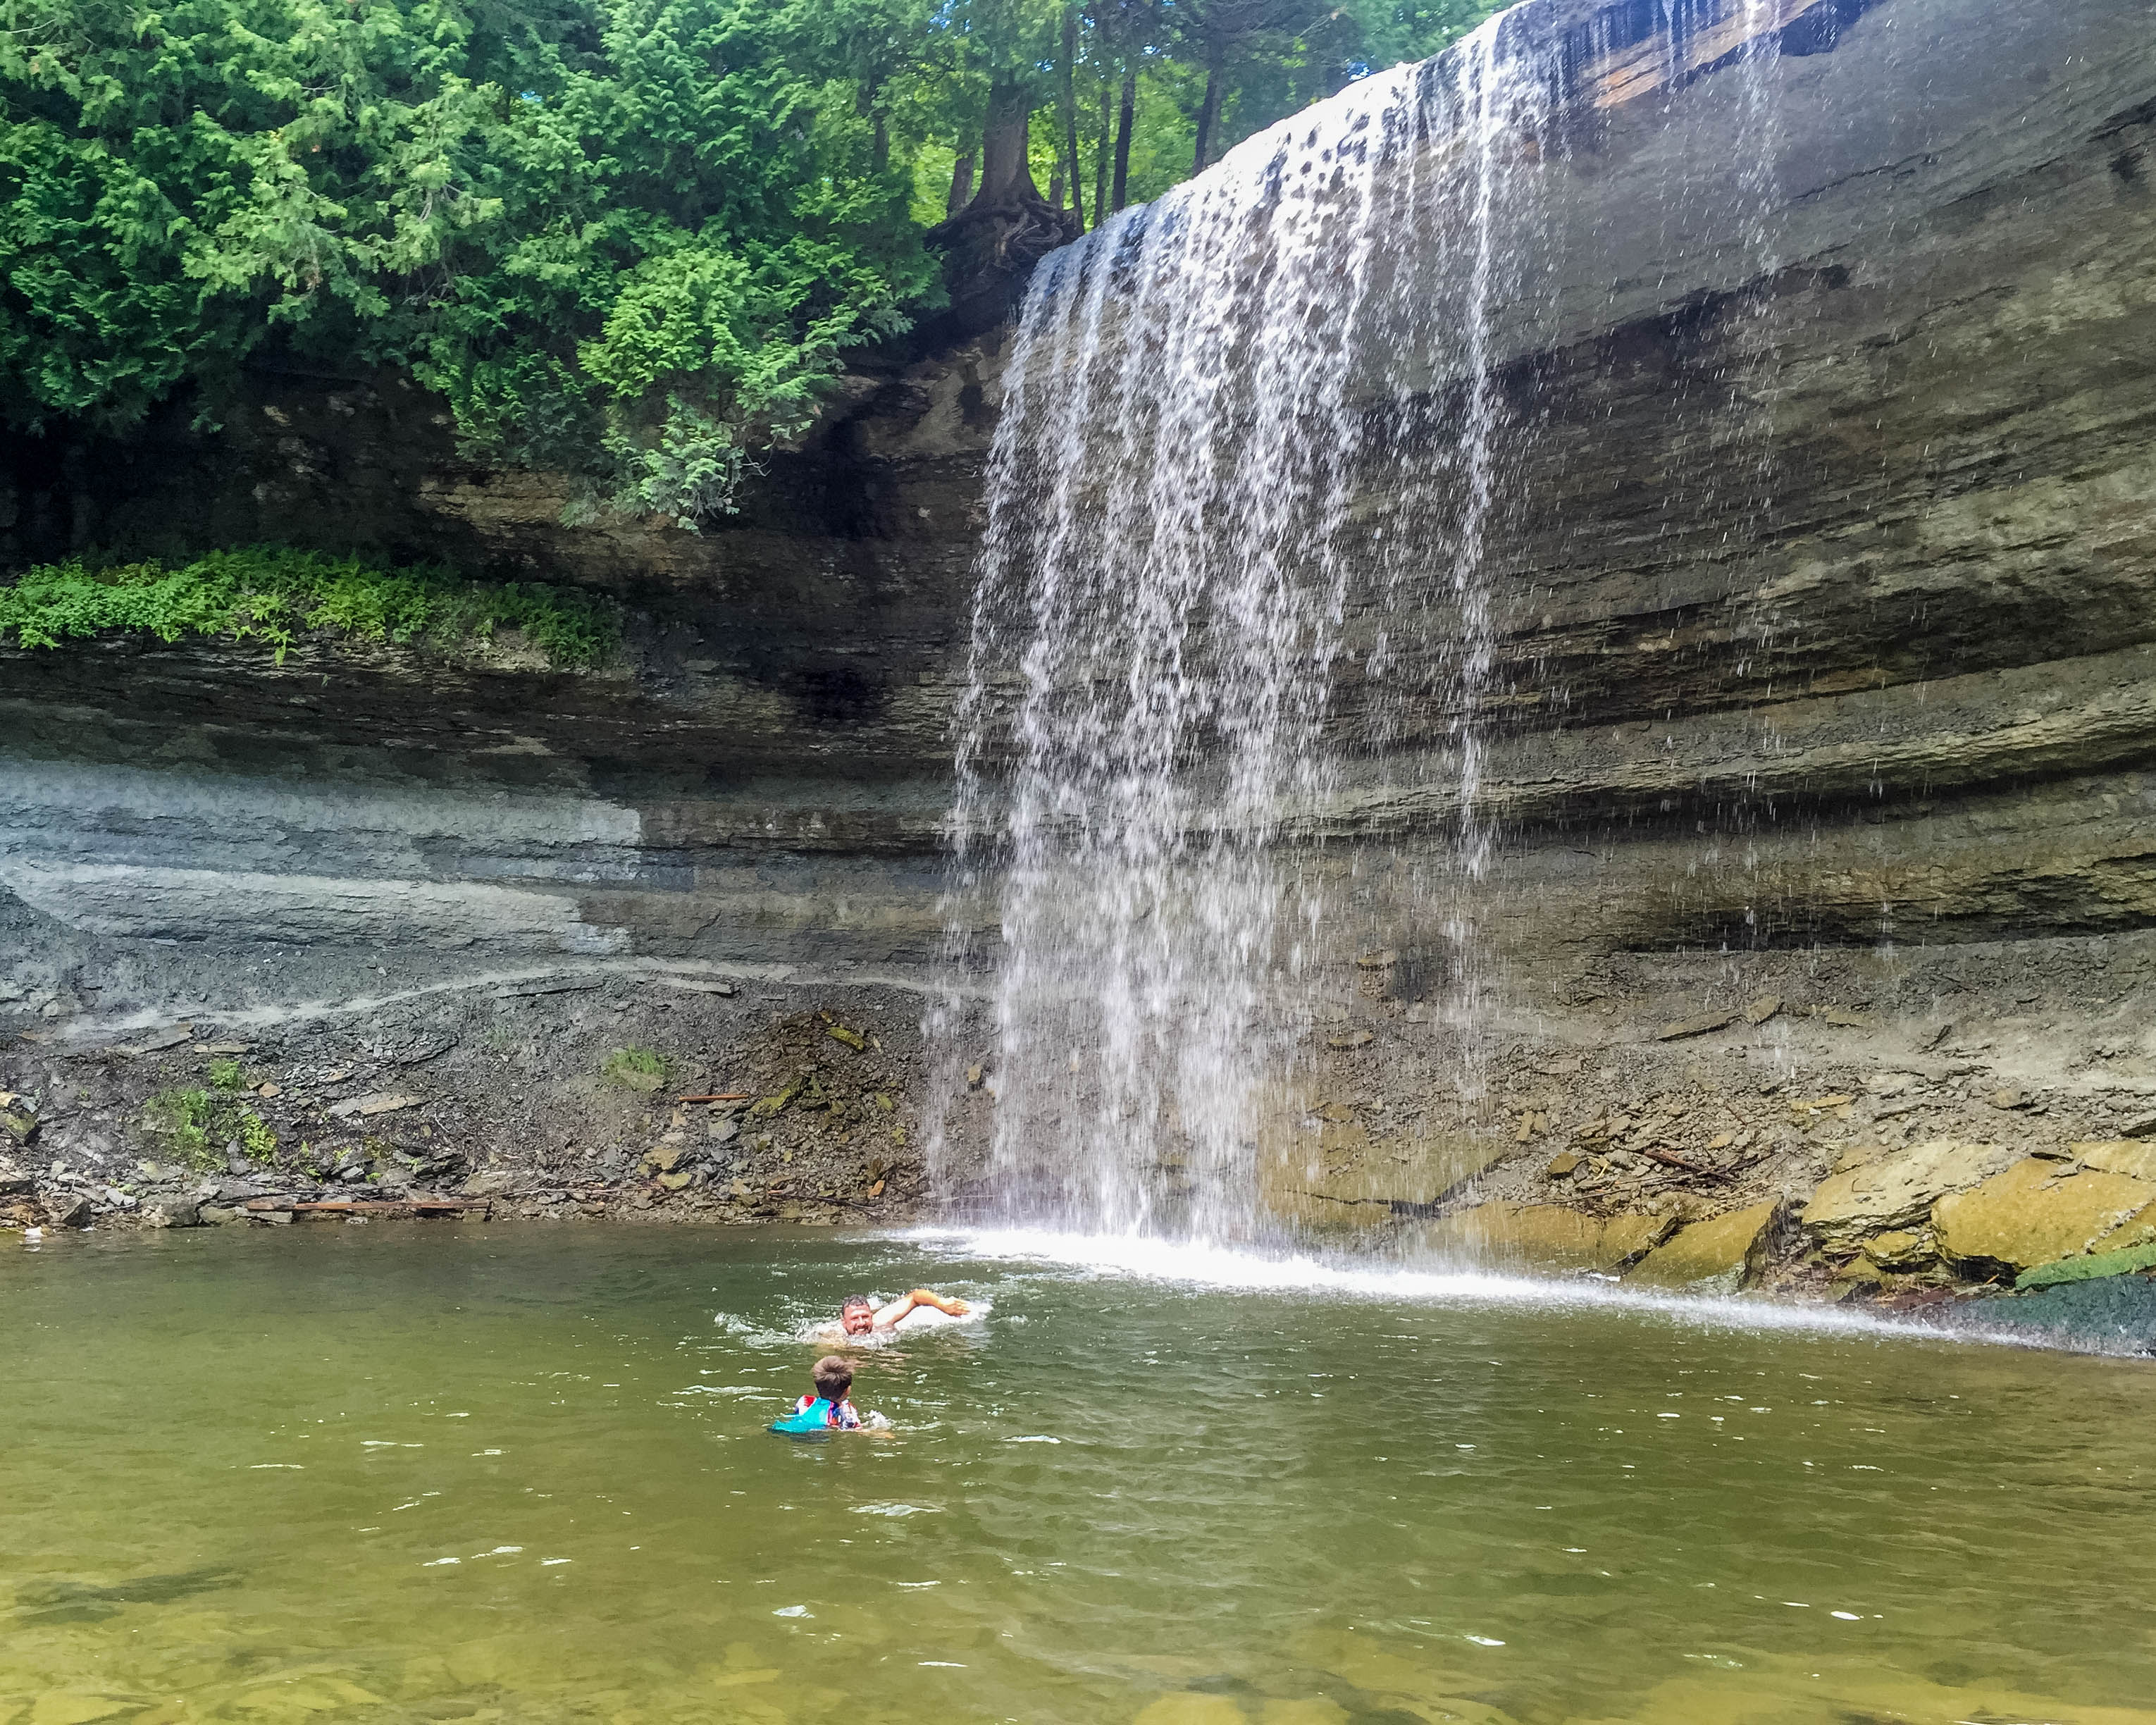 A father and son swim in the calm clear pool at the bottom of Bridal Veil Falls in the summer.